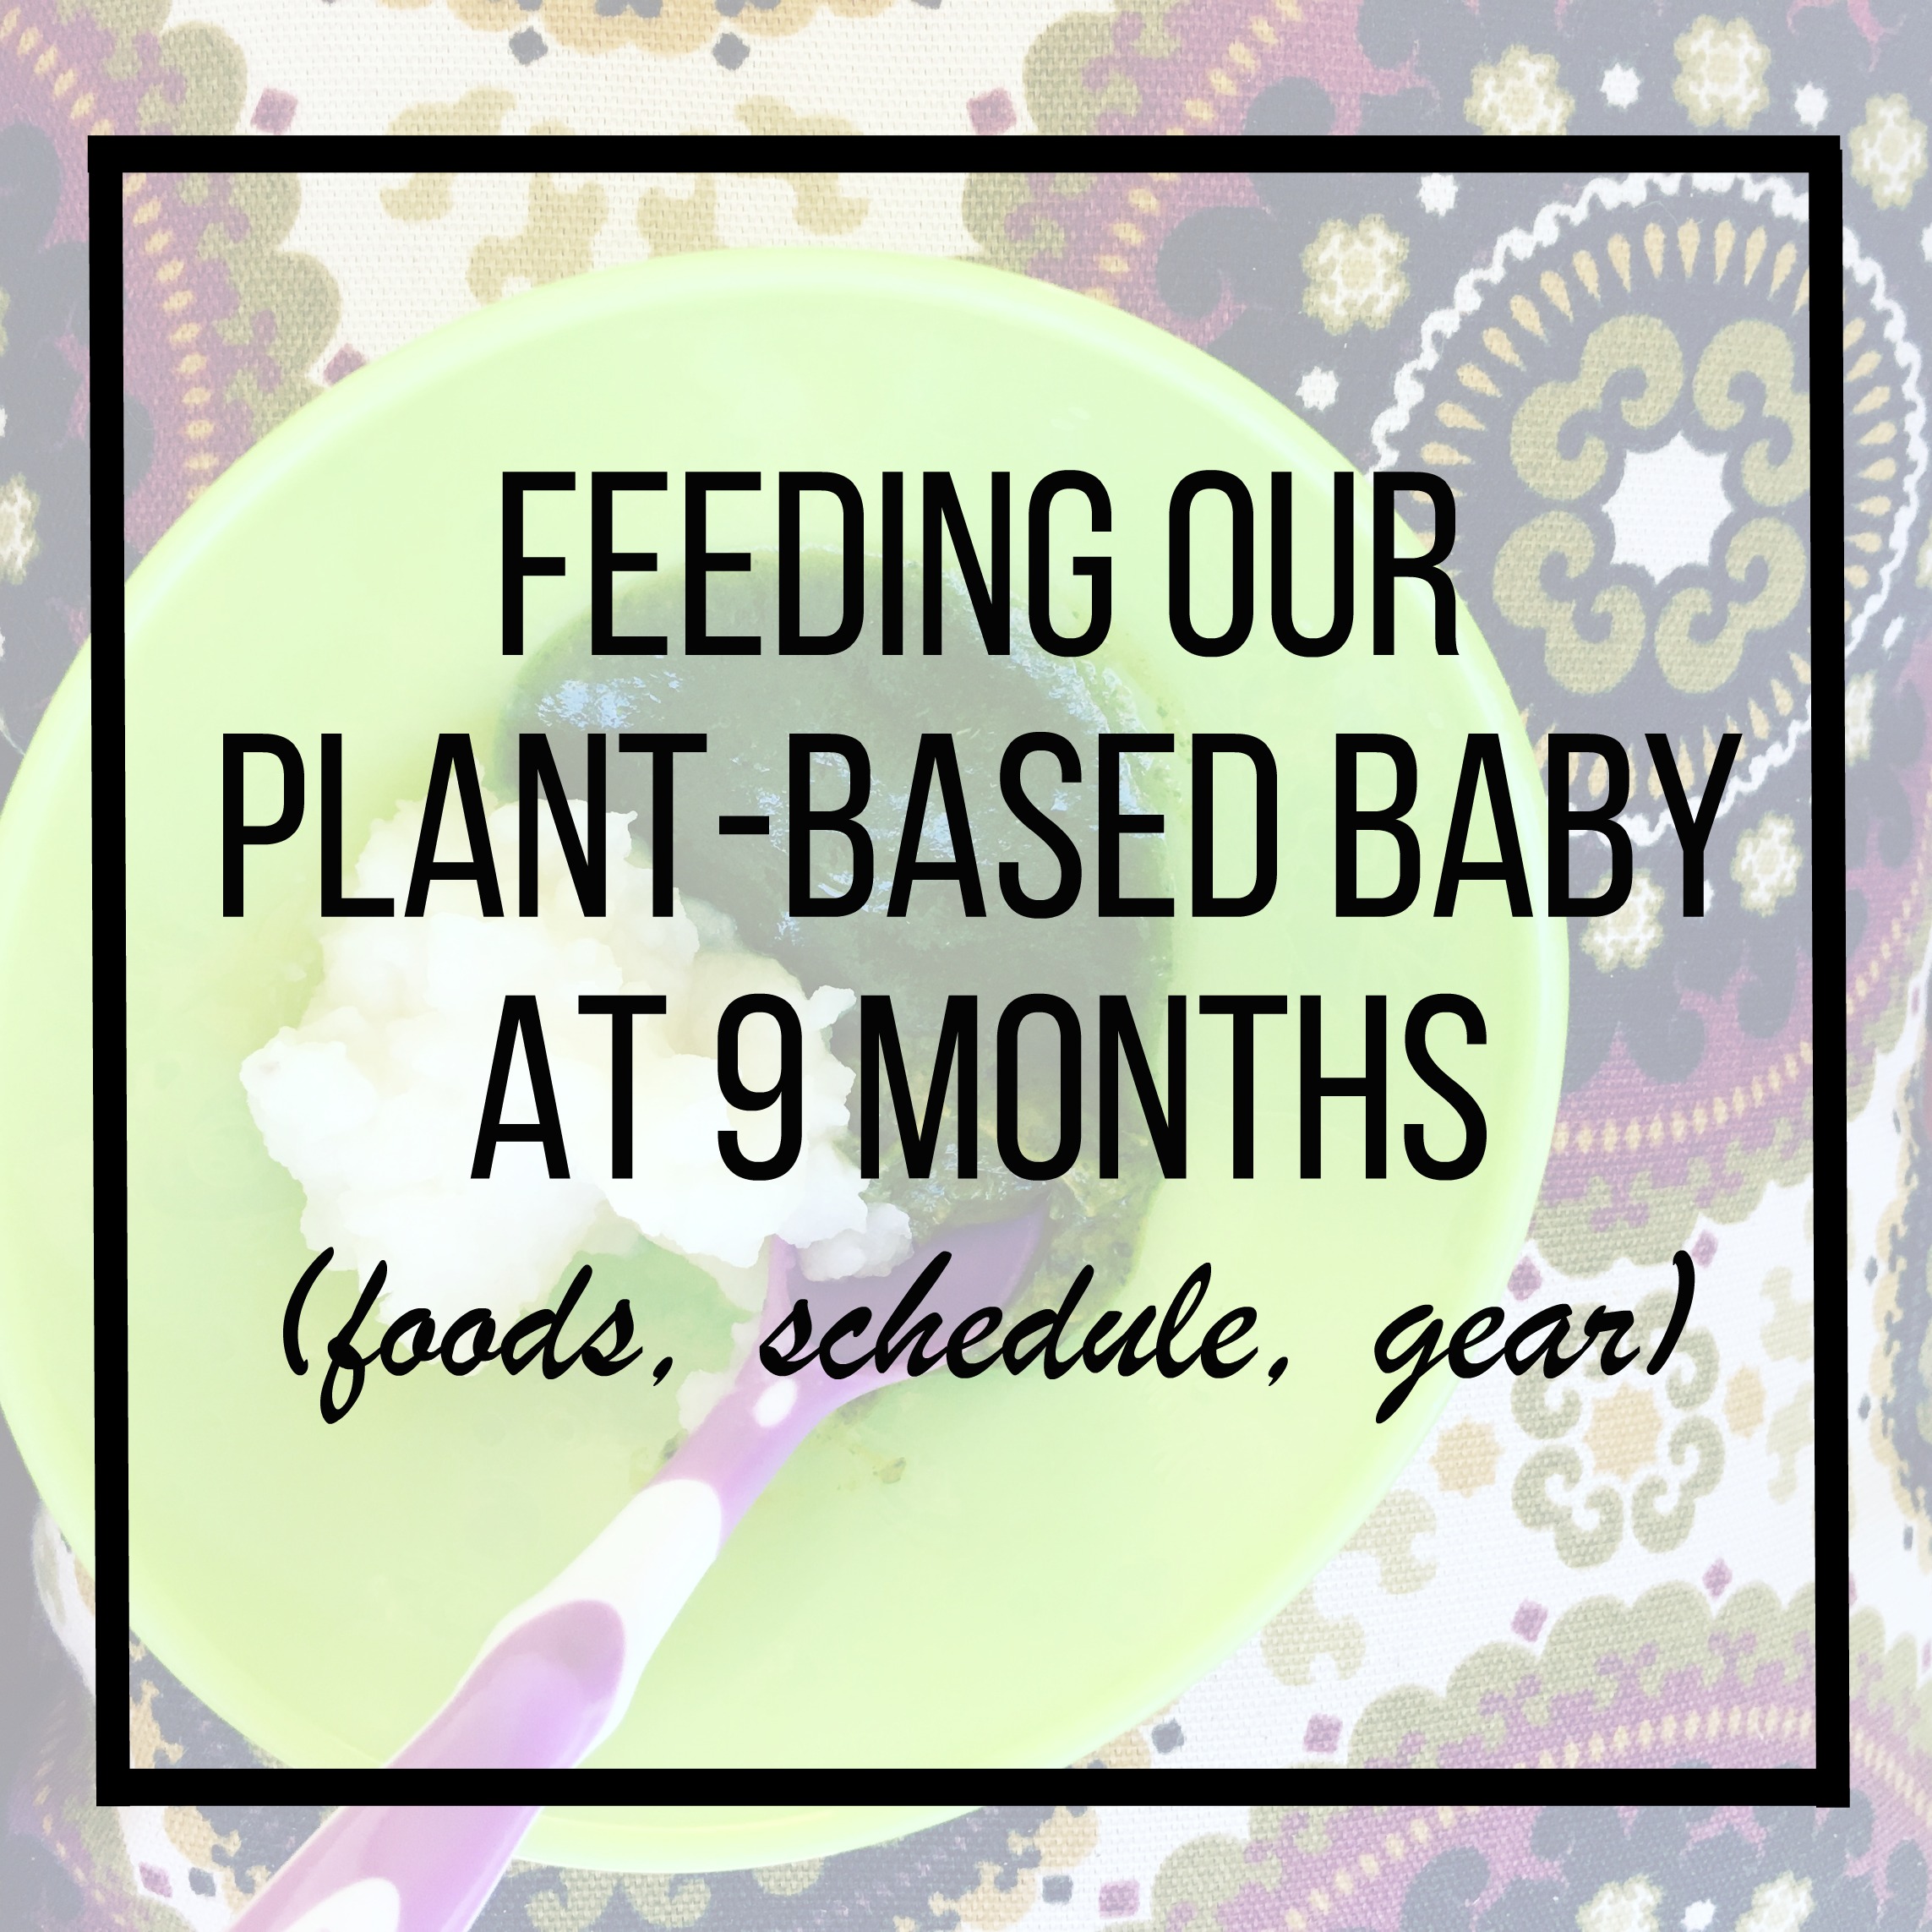 feeding our plant-based baby at 9 months